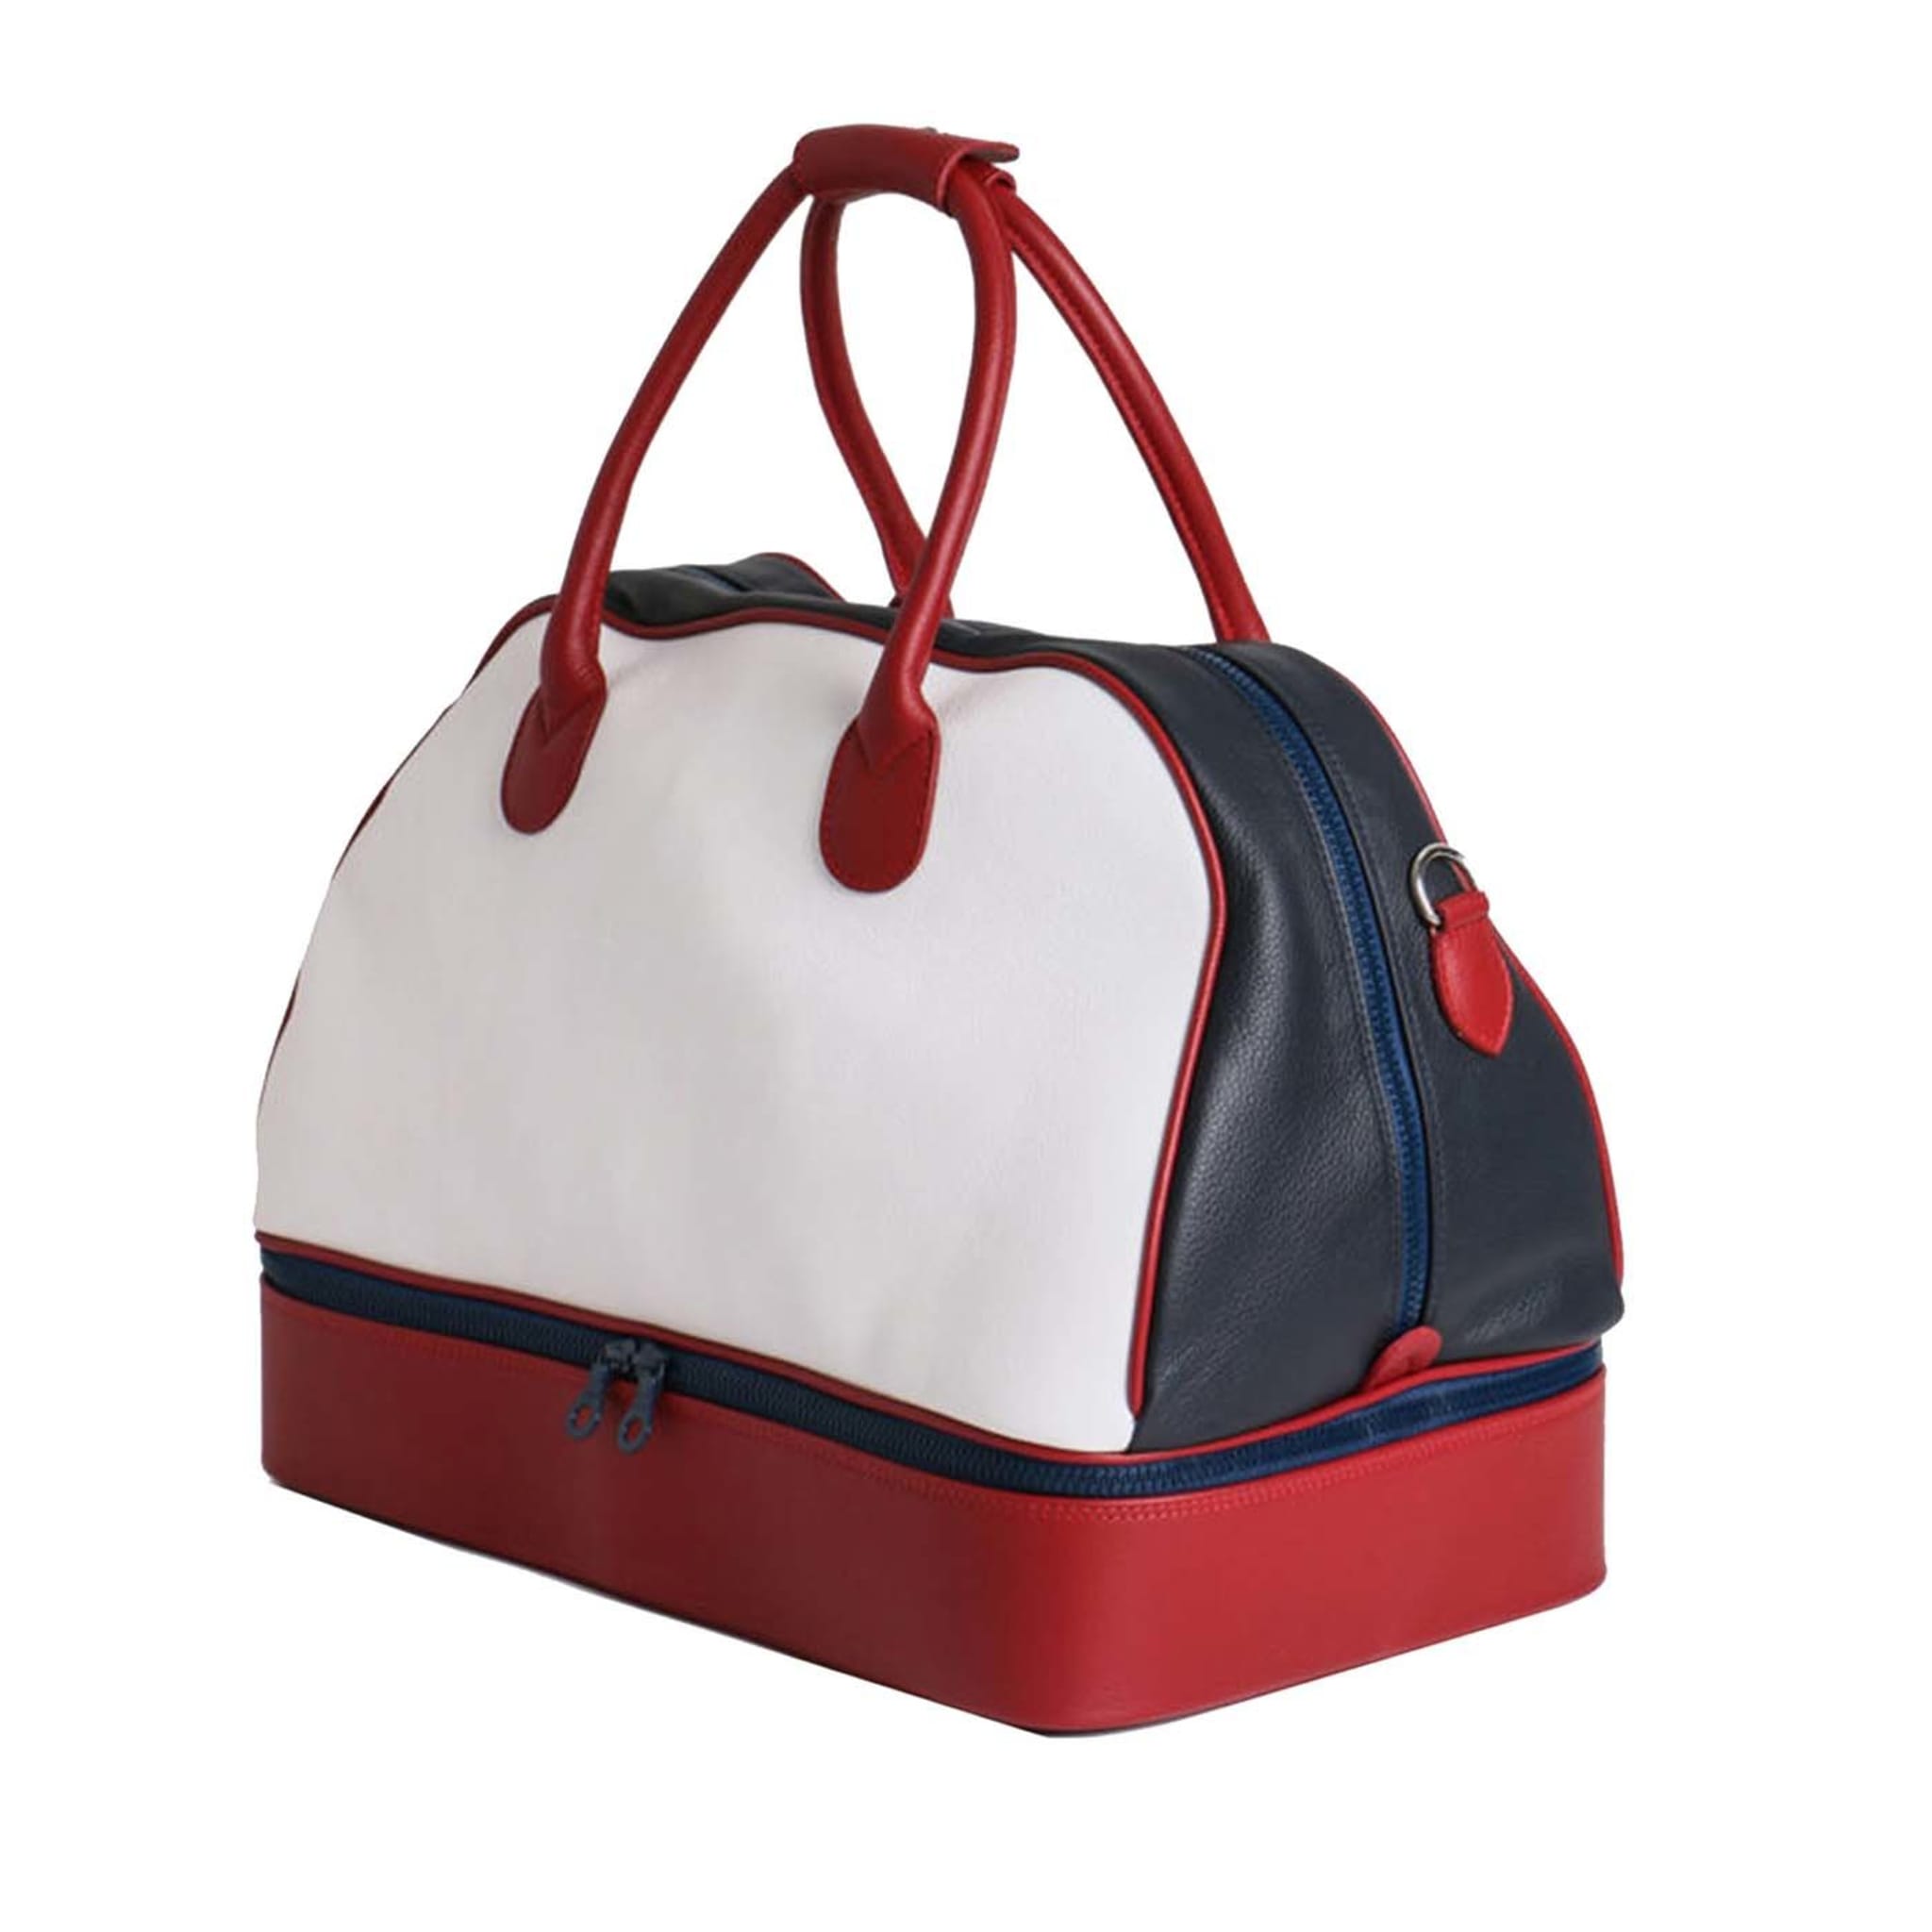 White, Red and Blue Double Bottom Bag - Main view